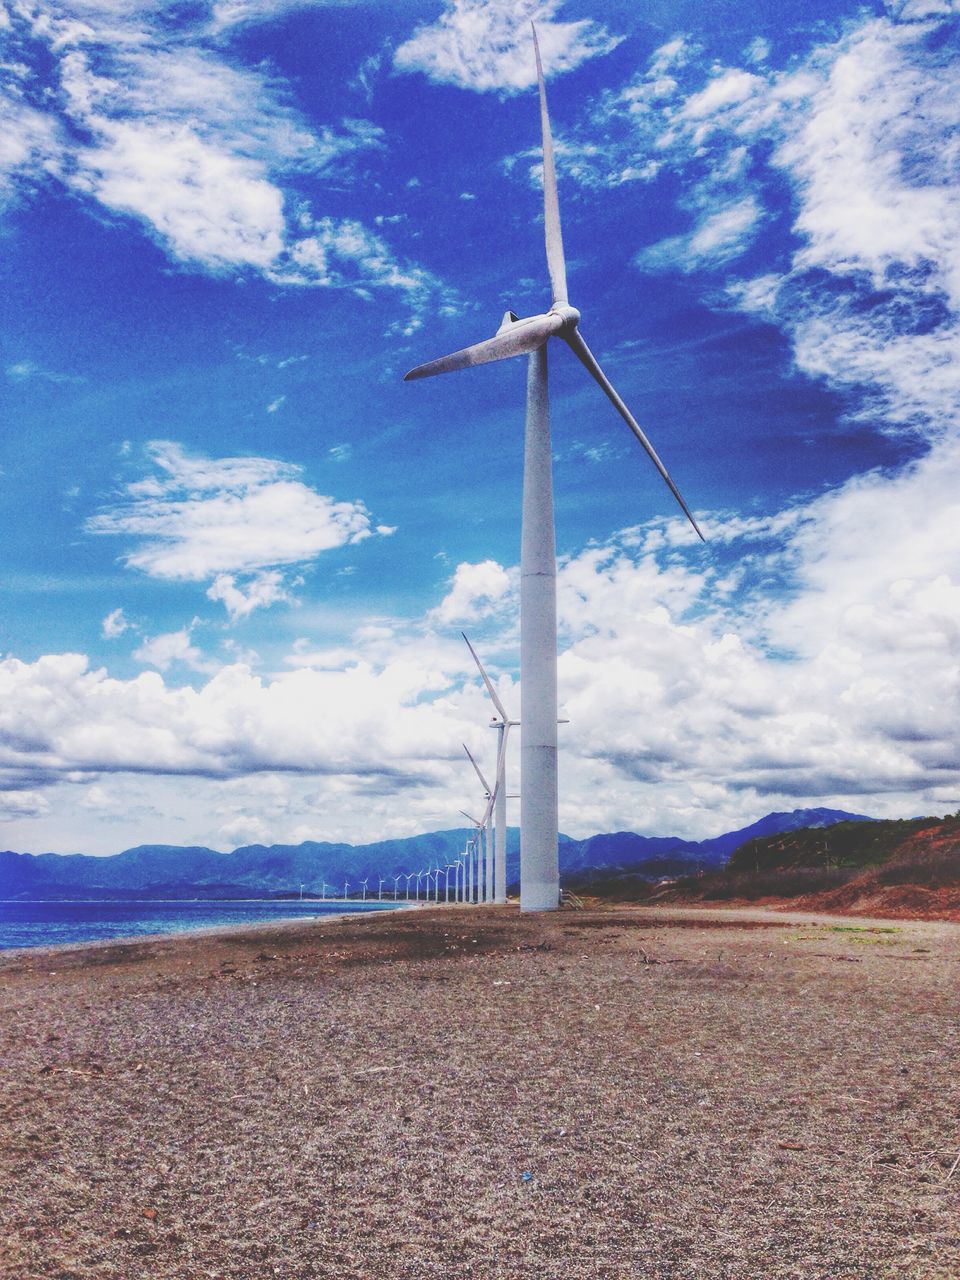 wind turbine, wind power, alternative energy, windmill, environmental conservation, sky, fuel and power generation, renewable energy, landscape, cloud - sky, tranquil scene, tranquility, cloud, rural scene, field, technology, scenics, nature, cloudy, day